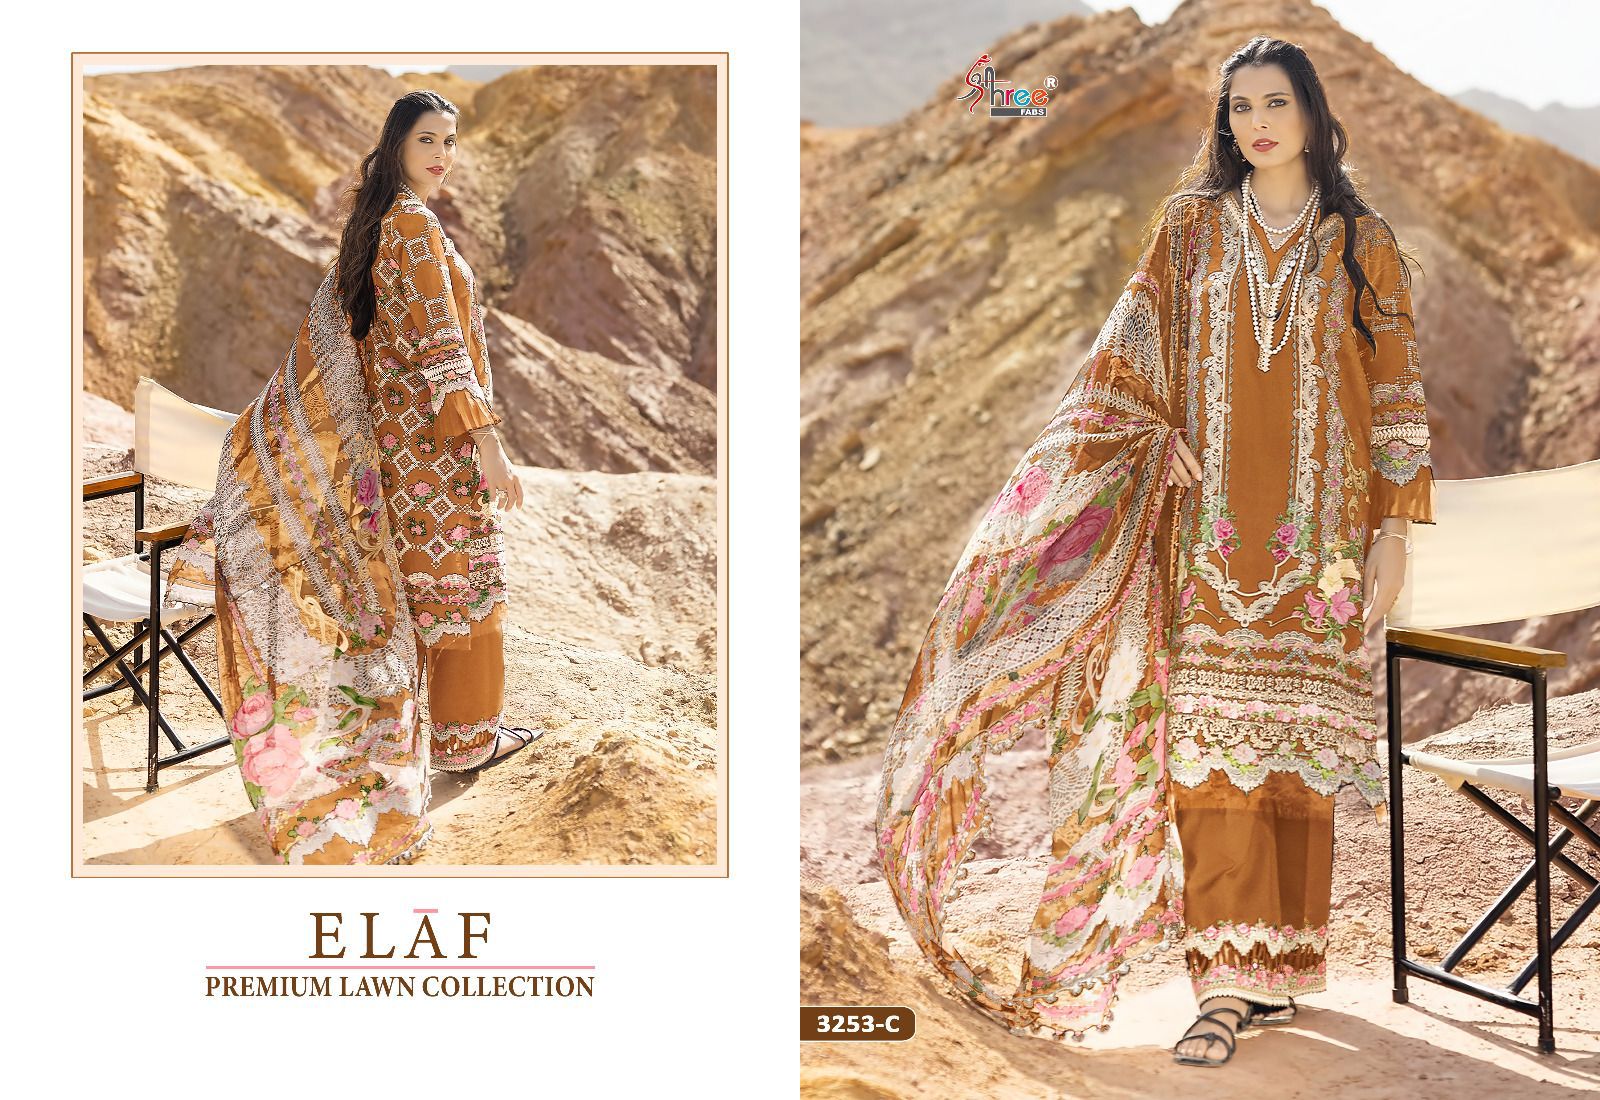 Shree Elaf Premium Lawn Collection collection 5